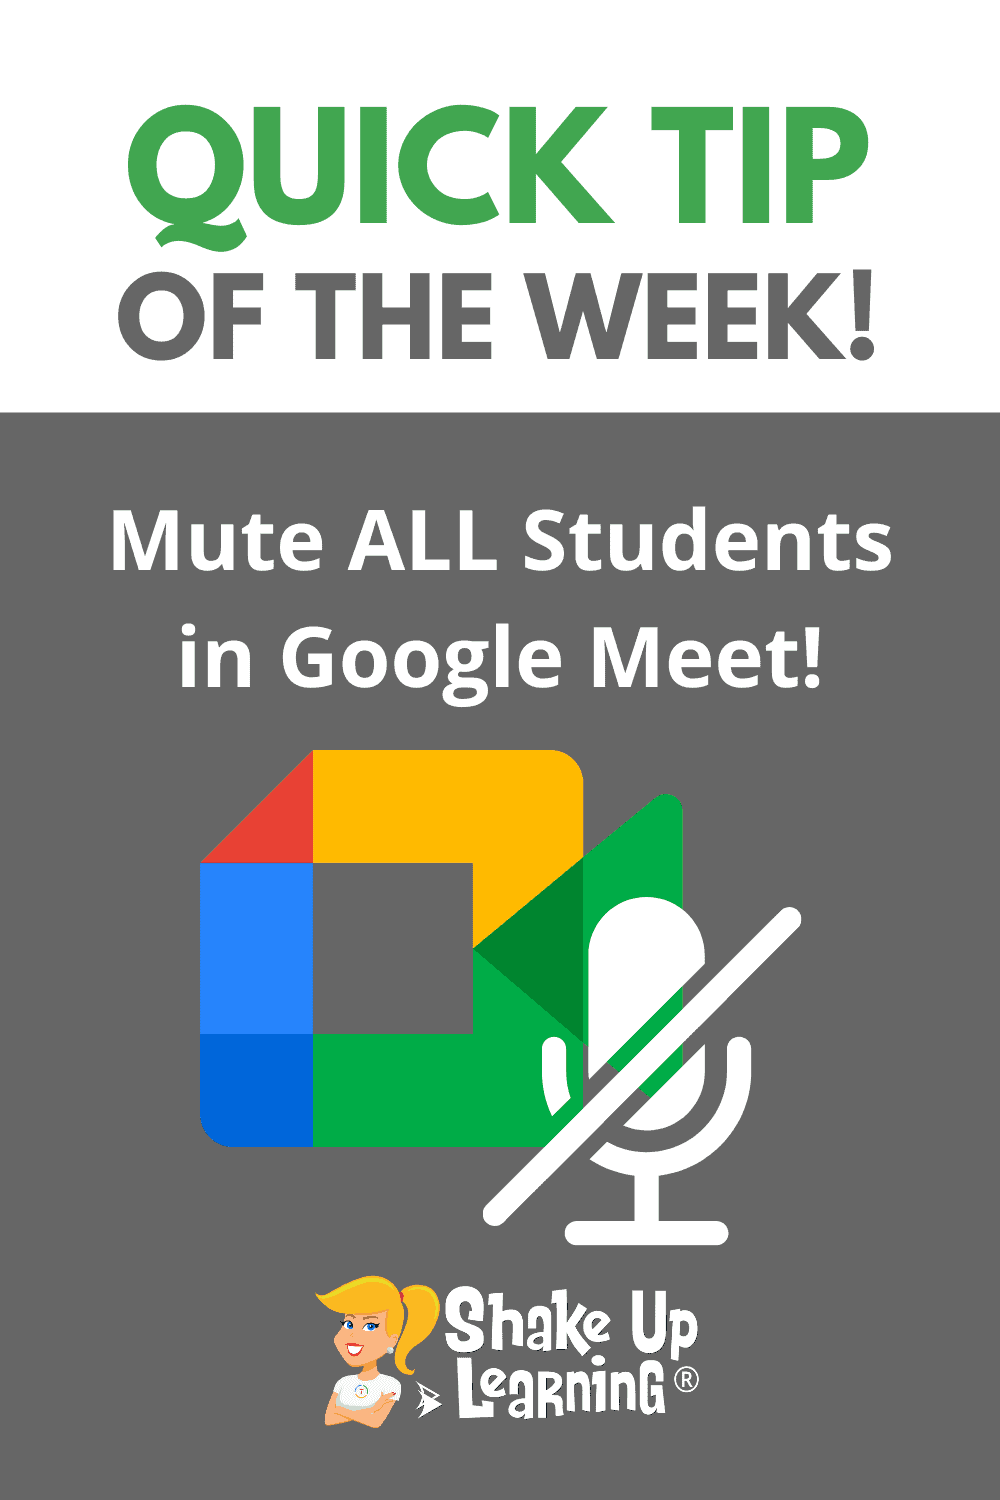 How to Mute ALL Students in Google Meet